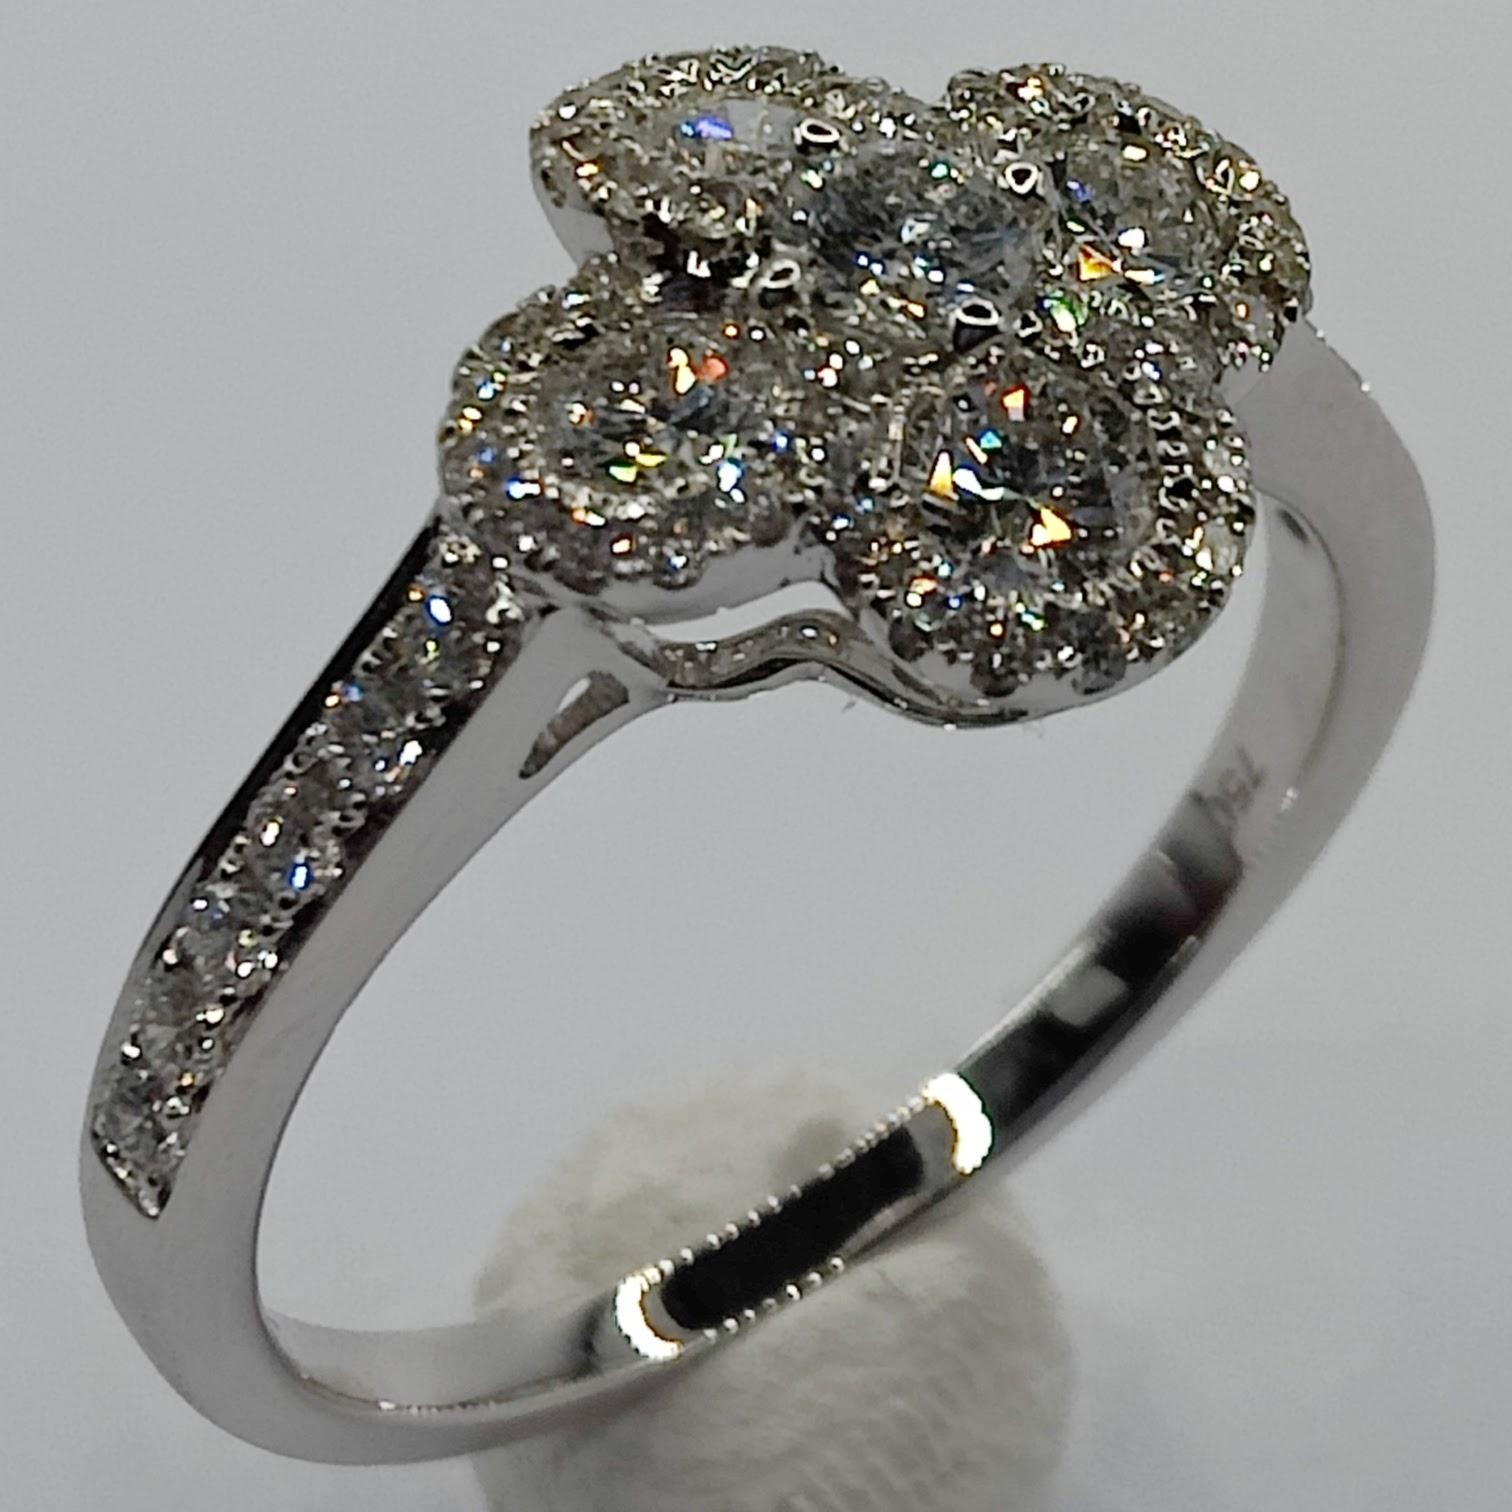 This stunning diamond ring is the perfect choice for adding a touch of luck and whimsy to your look. The ring features a beautiful four-leaf clover design set with diamonds, giving it a sparkling and eye-catching finish. The ring is made of white